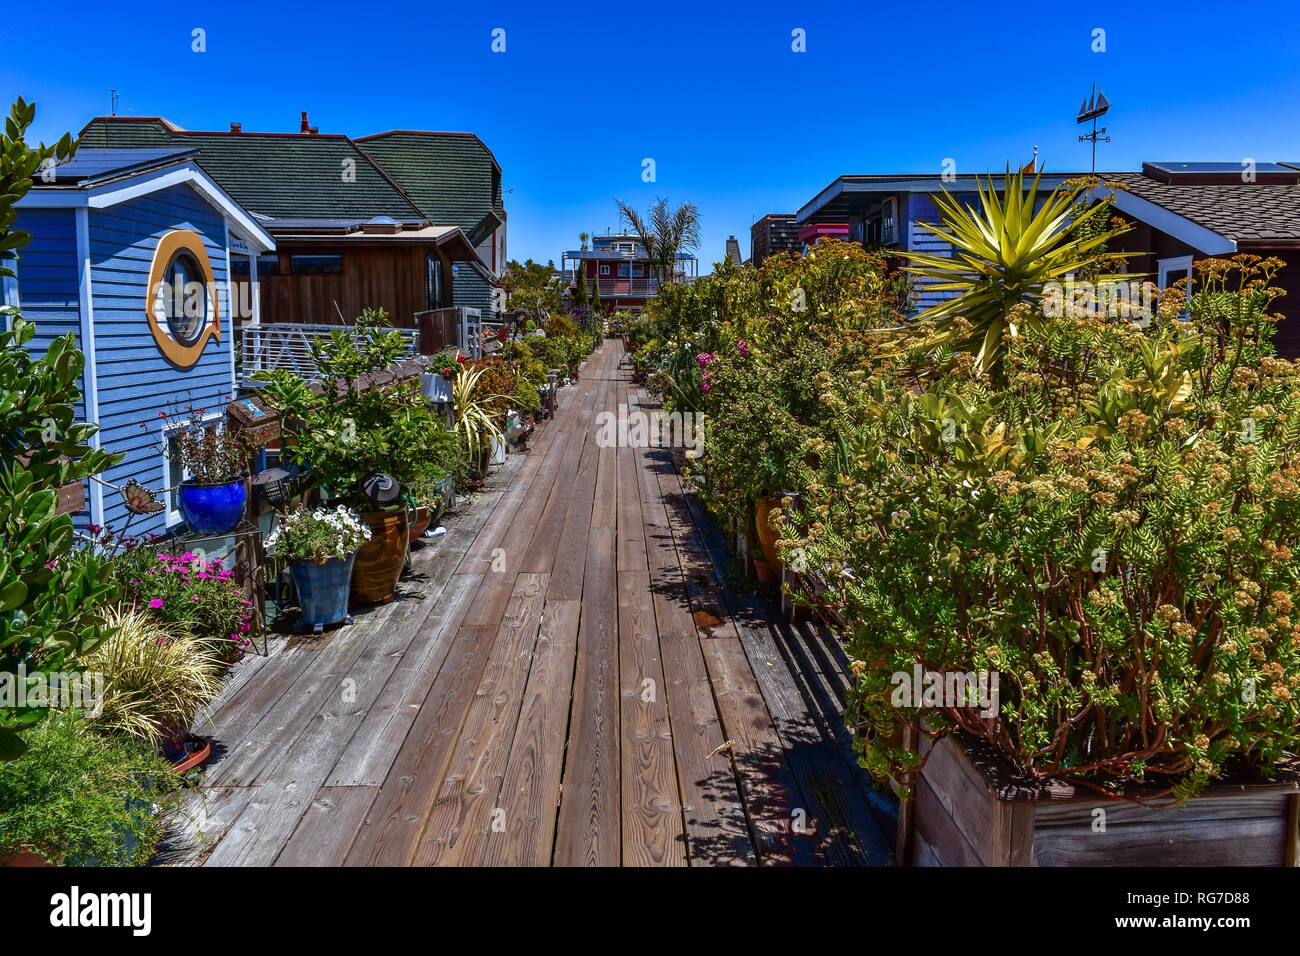 Colorful passage decorated with pot plants in a houseboats community in Sausalito, San Francisco bay, USA Stock Photo